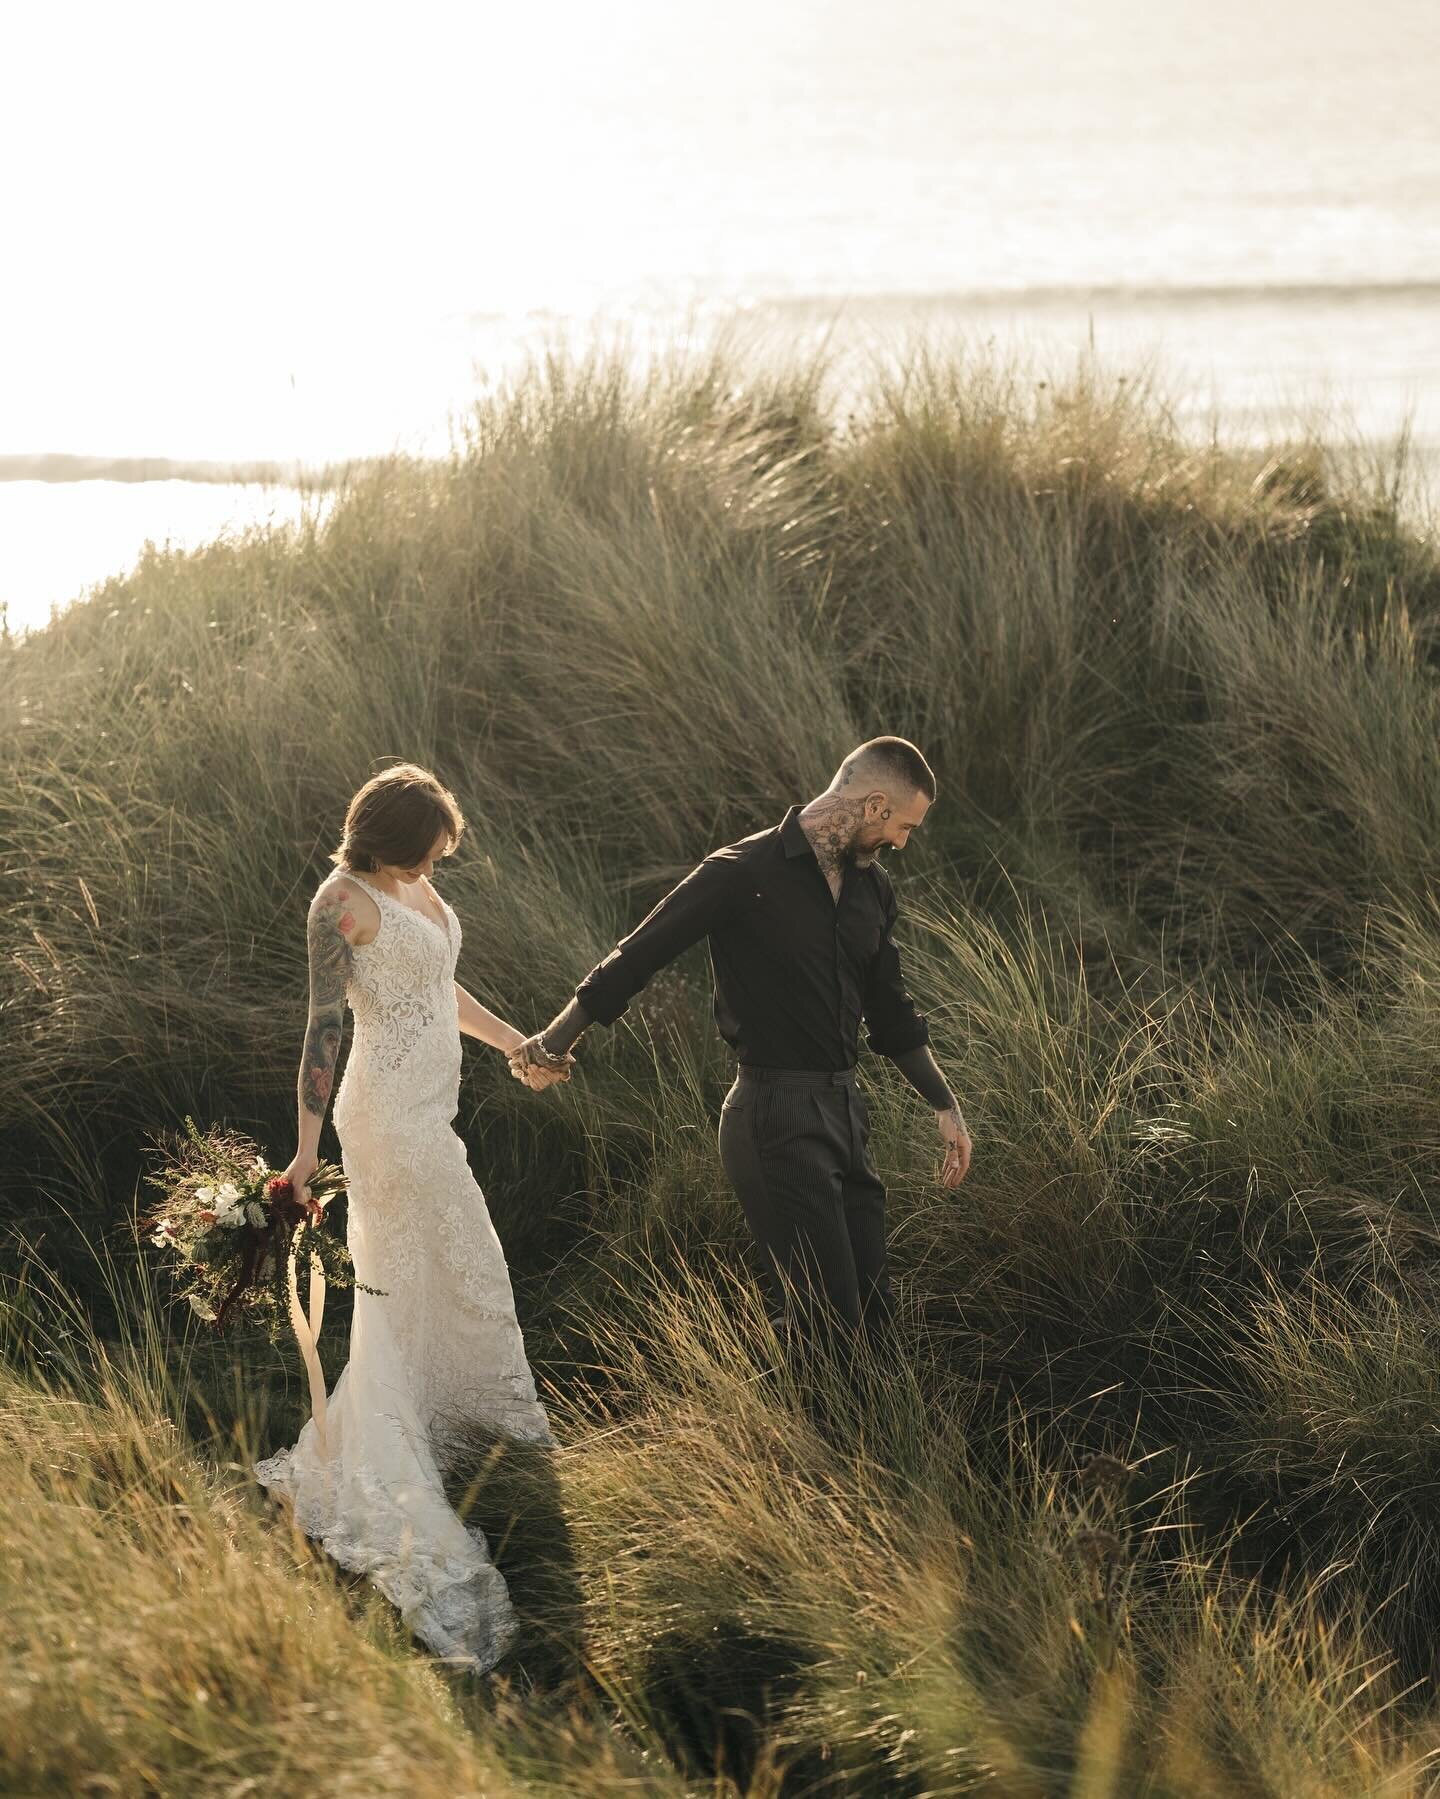 Verity Westcott is a Wedding & elopement photographer based in Cornwall ...